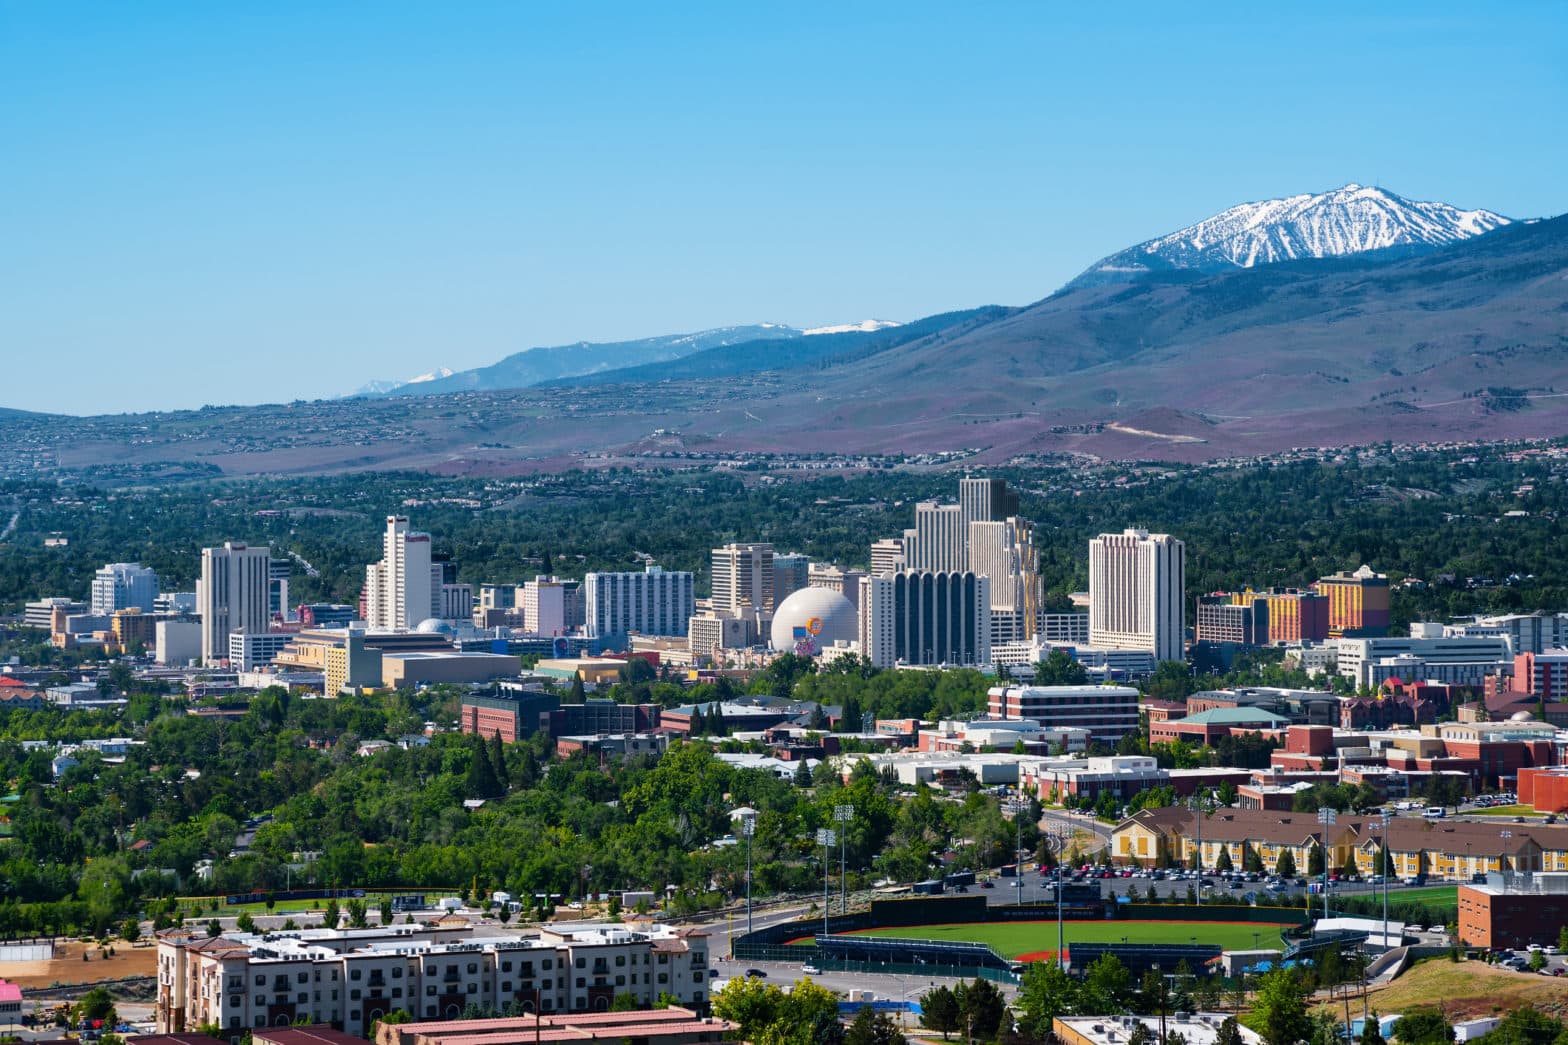 Reno Nevada skyline with mountains in the distance